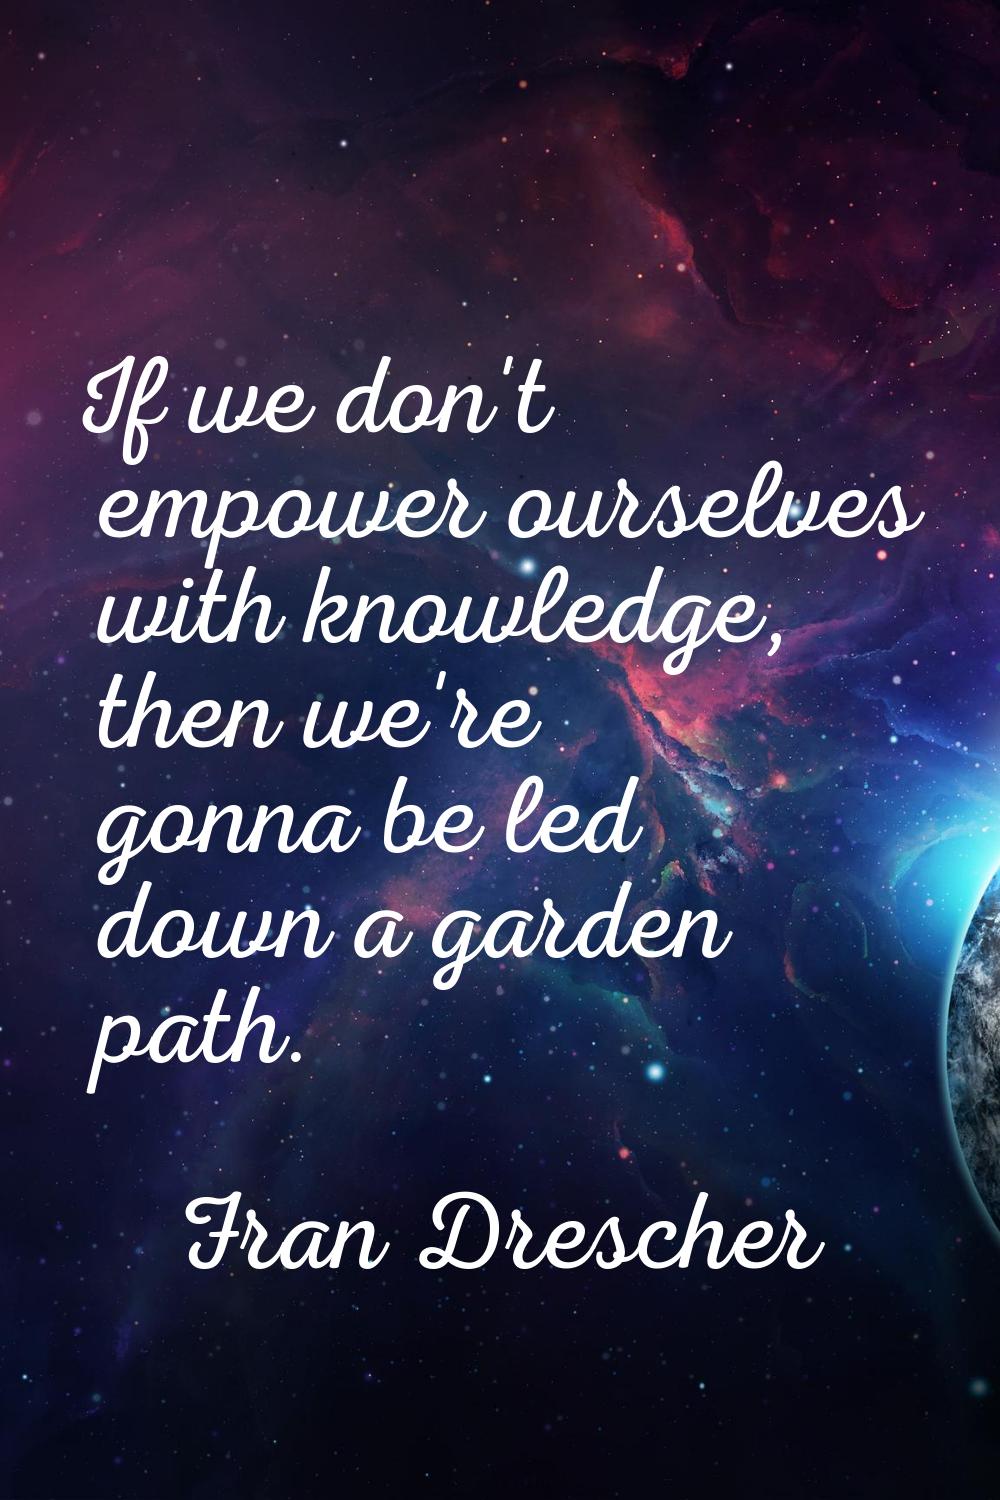 If we don't empower ourselves with knowledge, then we're gonna be led down a garden path.